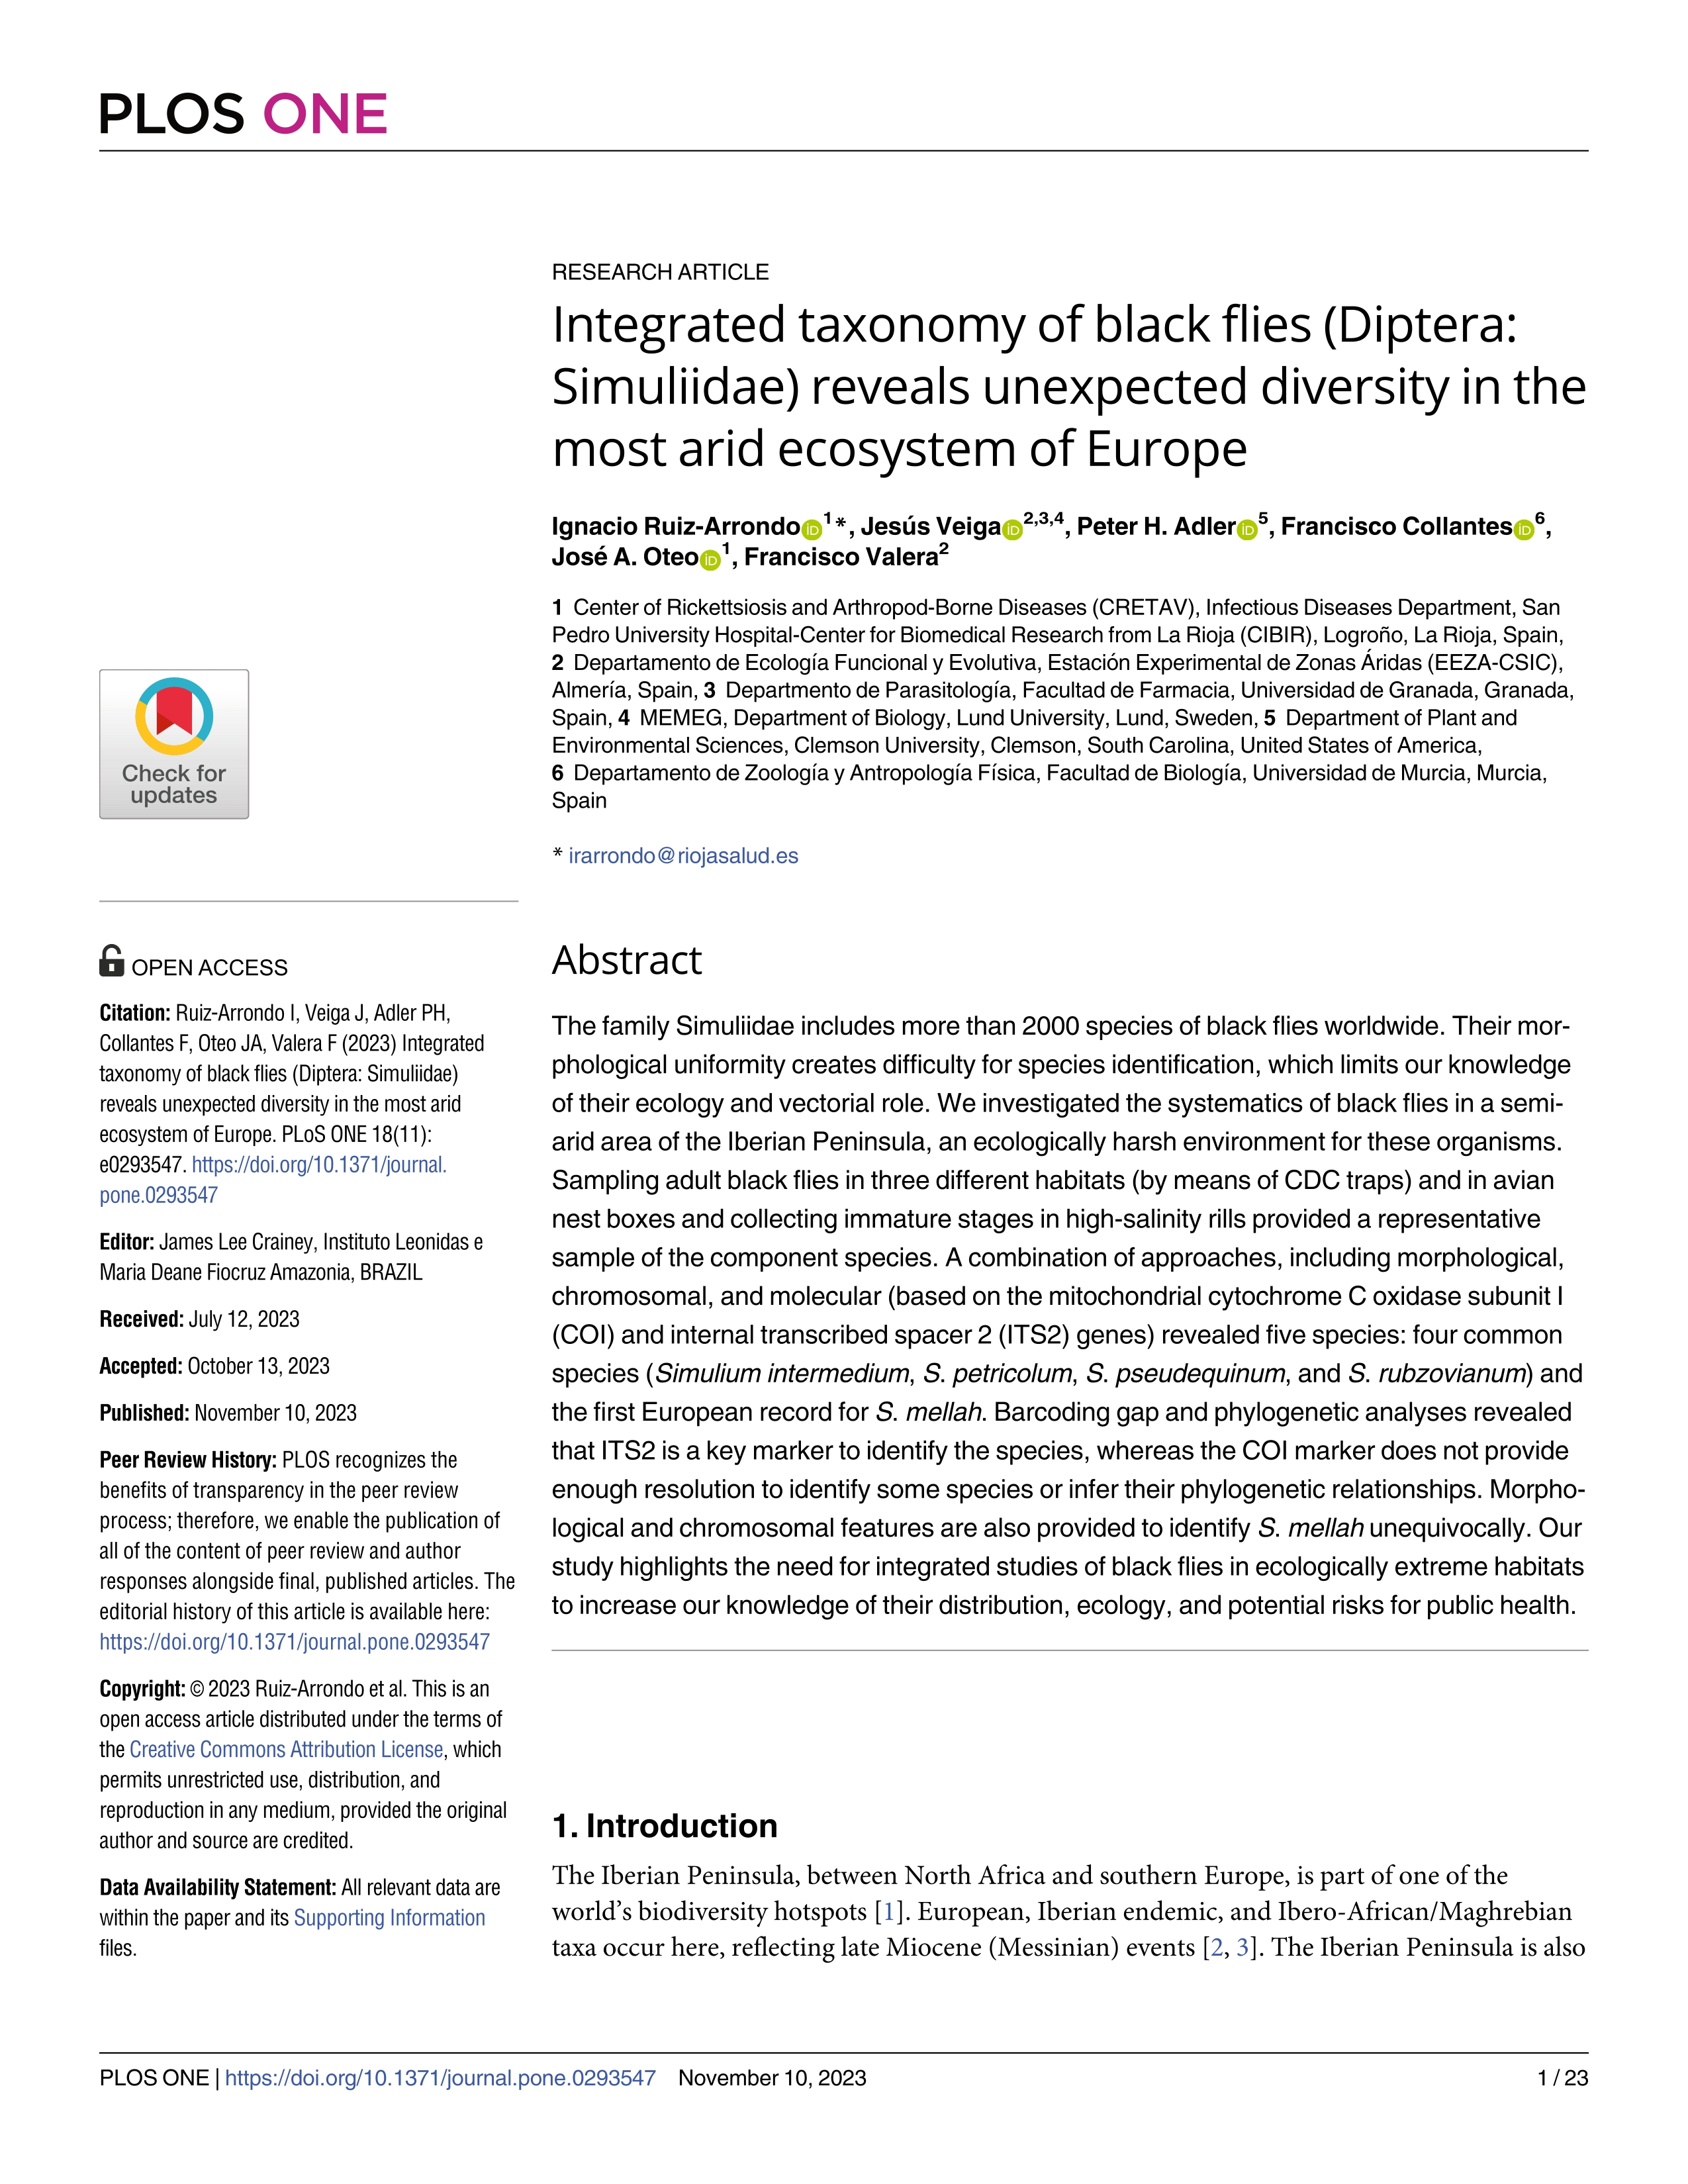 Integrated taxonomy of black flies (Diptera: Simuliidae) reveals unexpected diversity in the most arid ecosystem of Europe